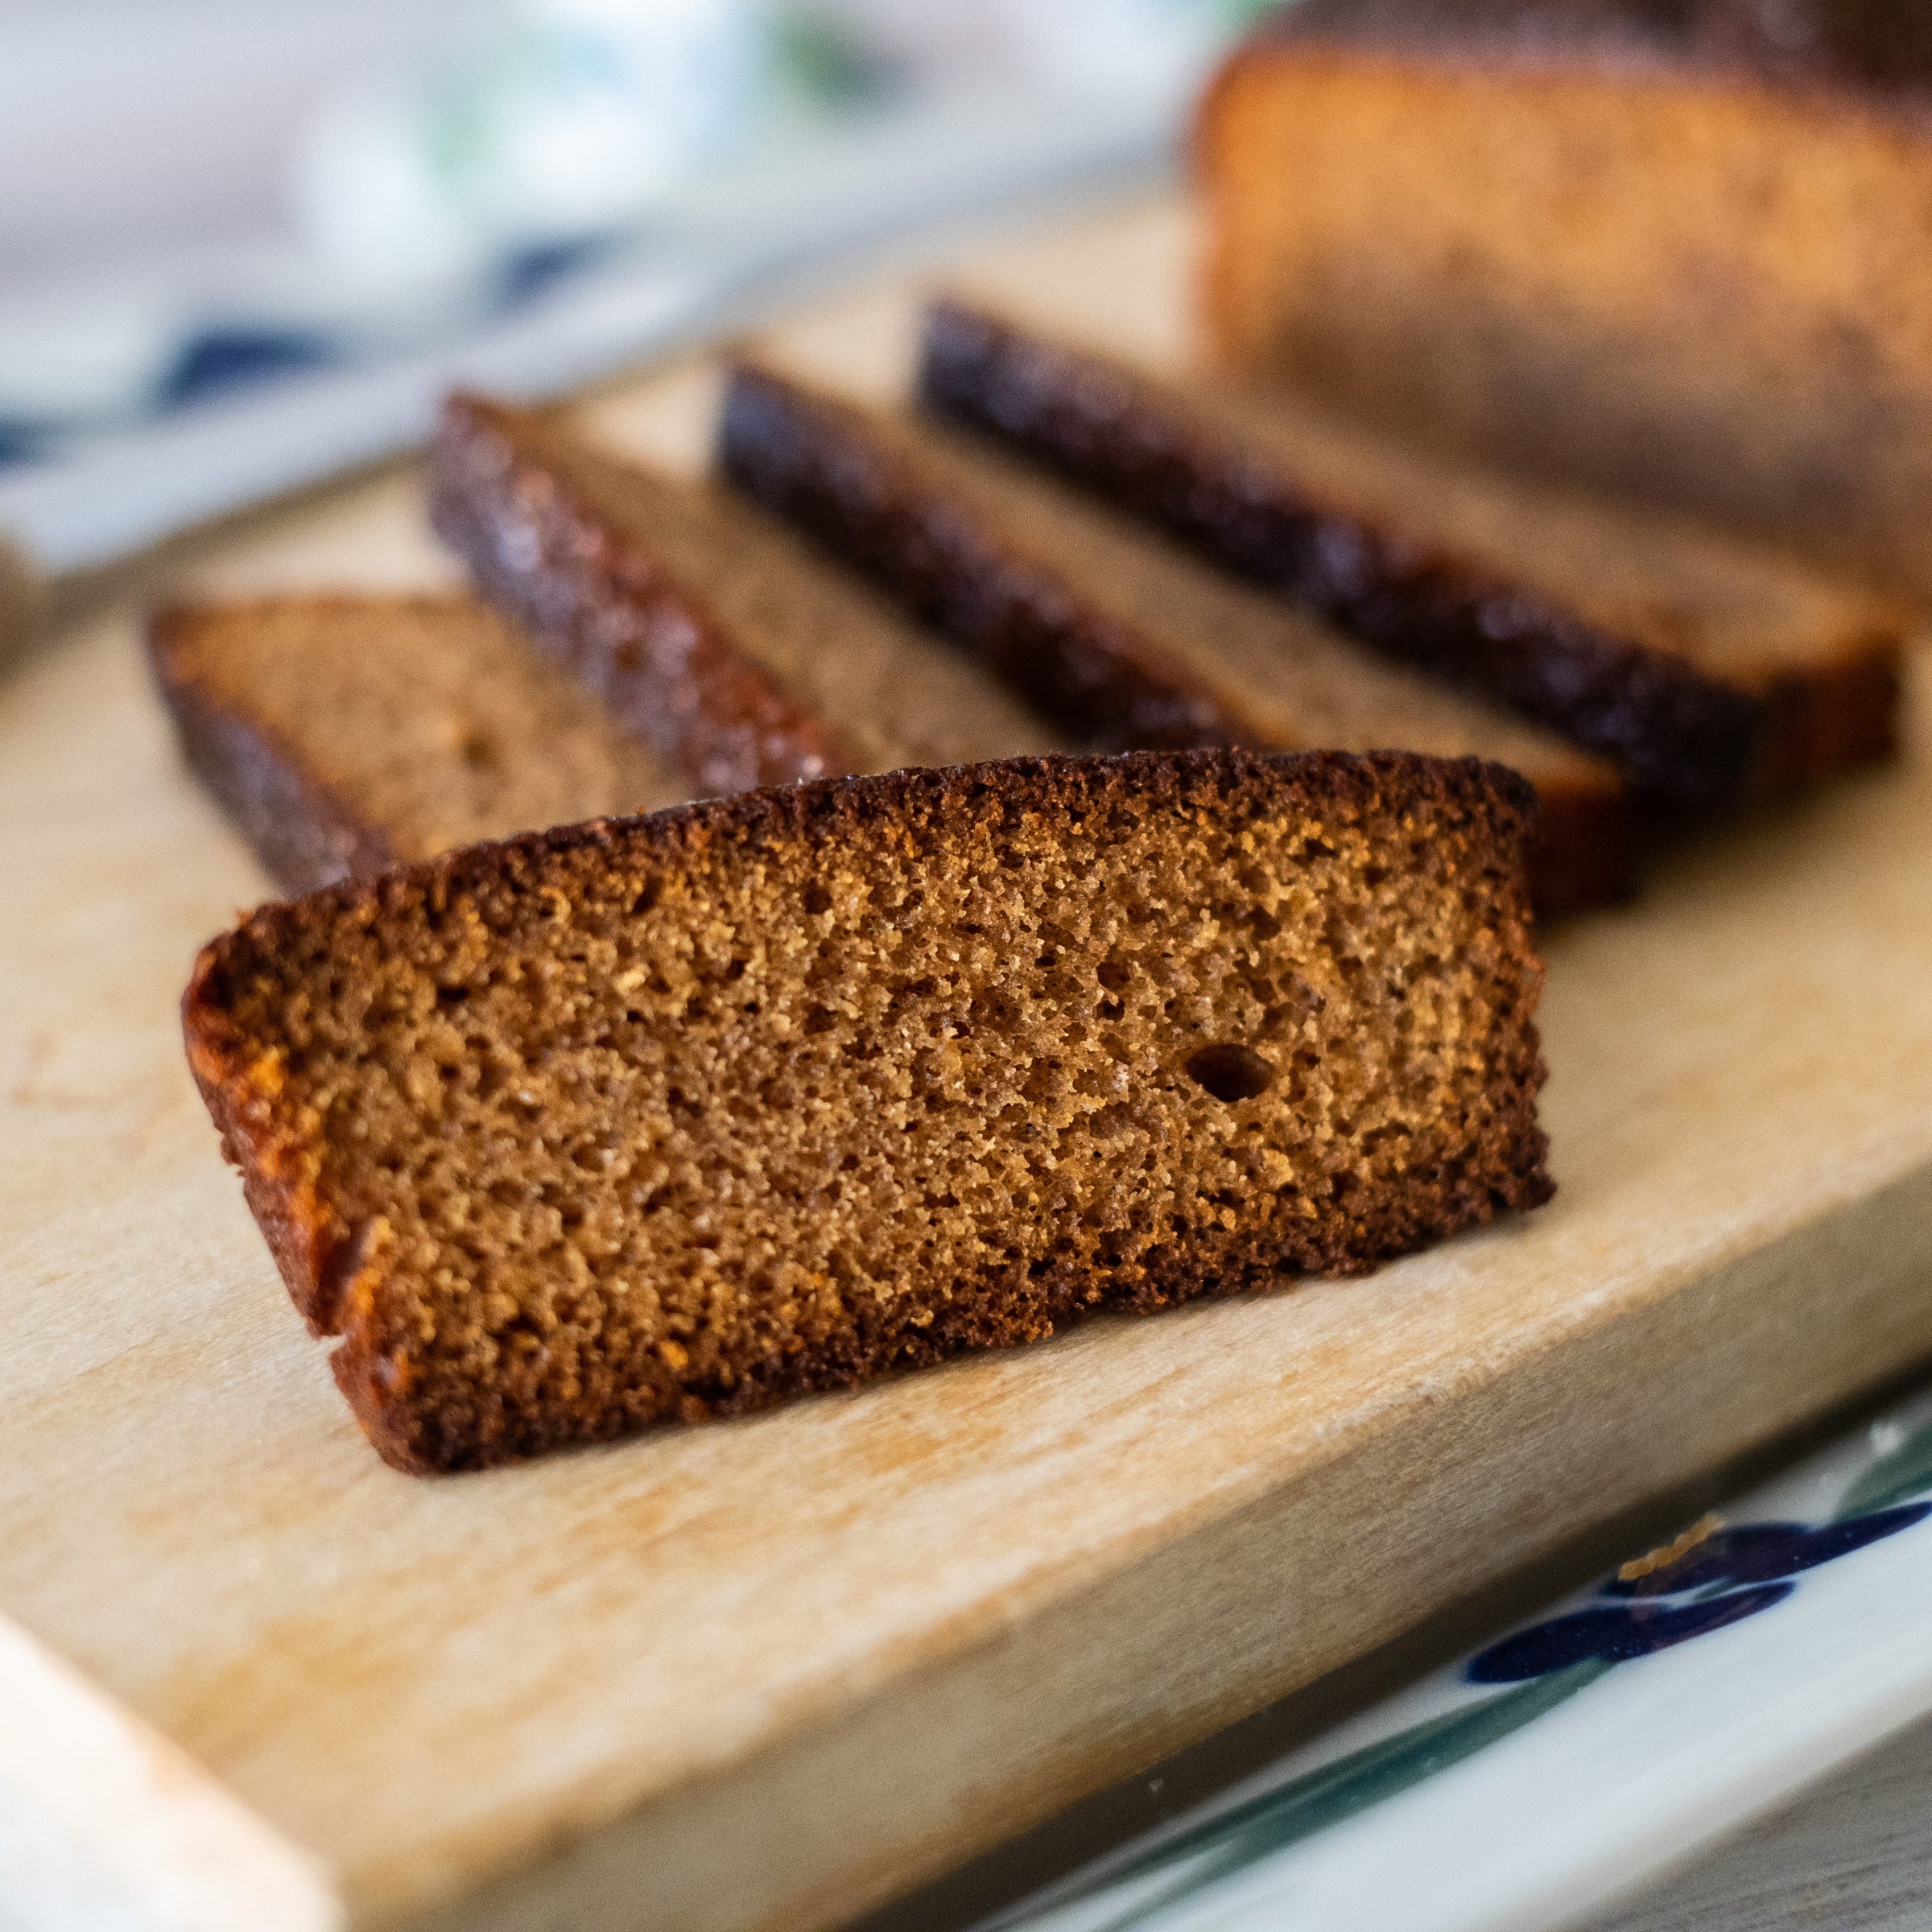 Our honey cake has a delicious blend of spices and stays moist.